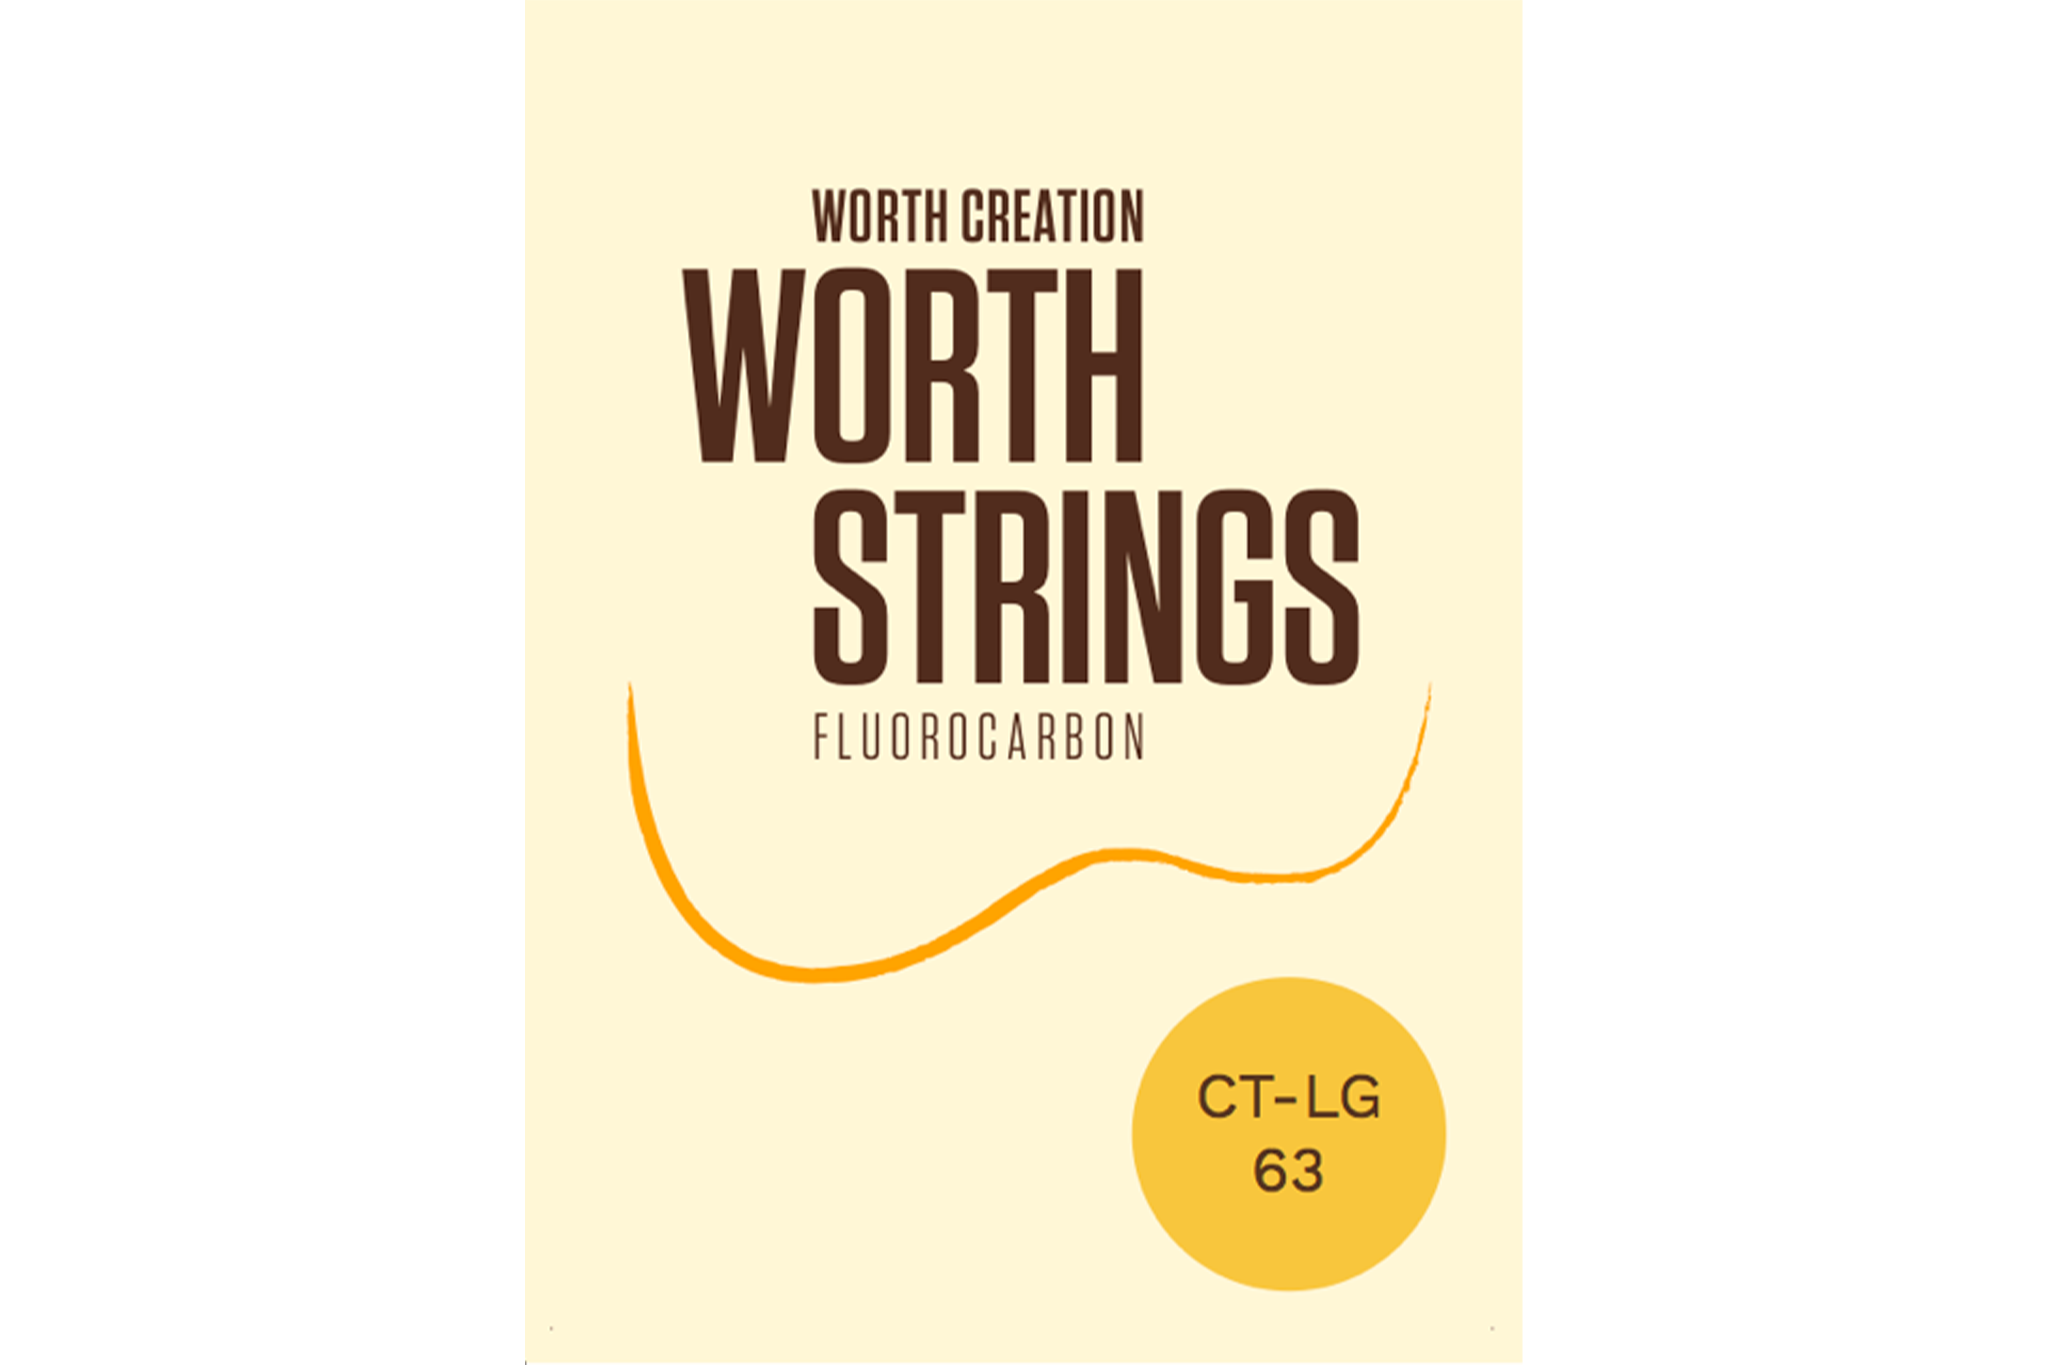 Worth Clear Fluorocarbon Tenor Low-G Ukulele Strings CT-LG 63 inch (G-C-E-A) Enough For 2 Sets